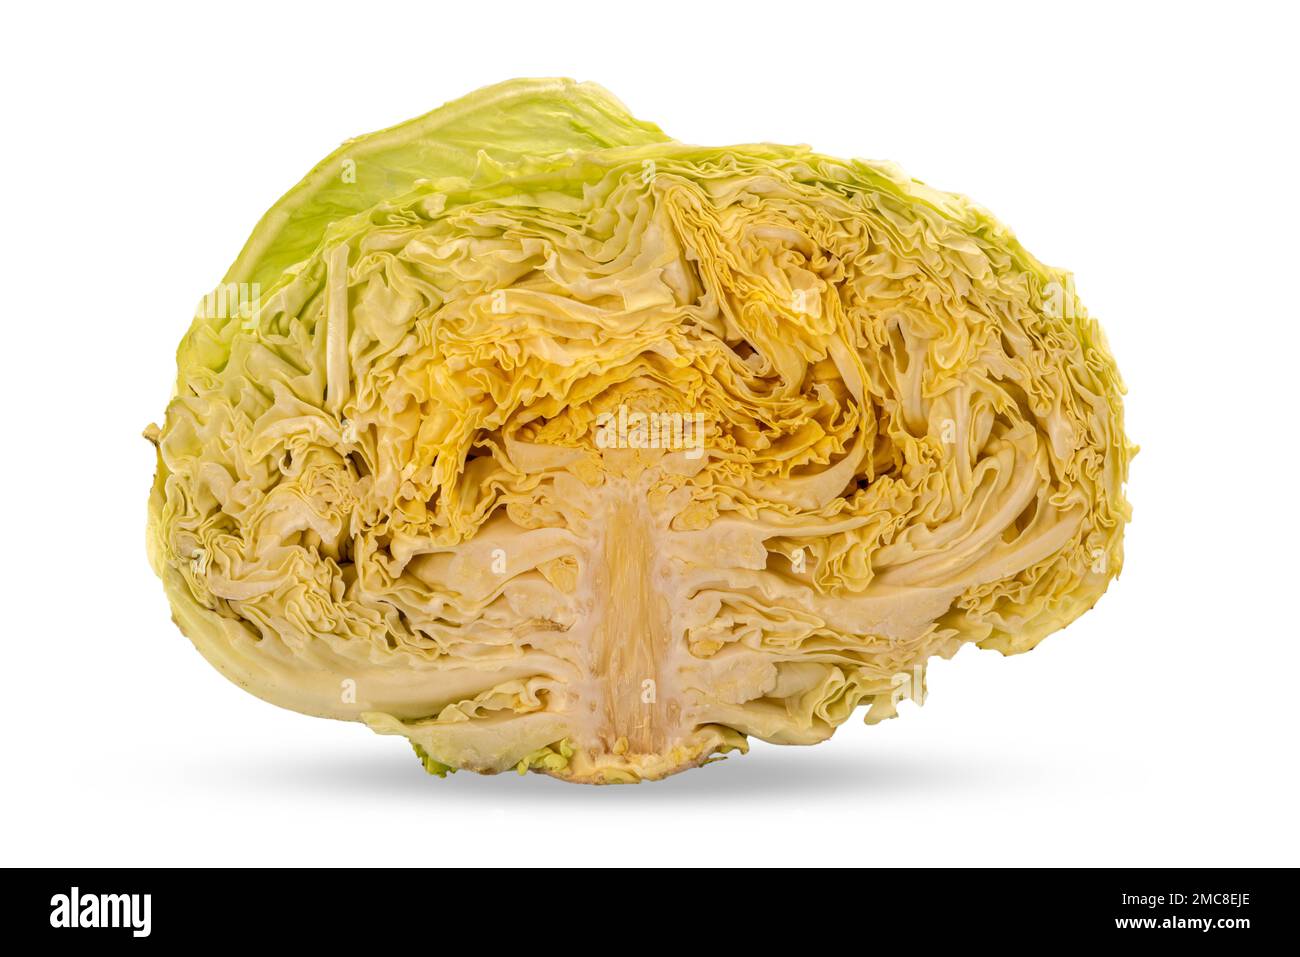 Cabbage cut in half isolated on white with clipping path included Stock Photo